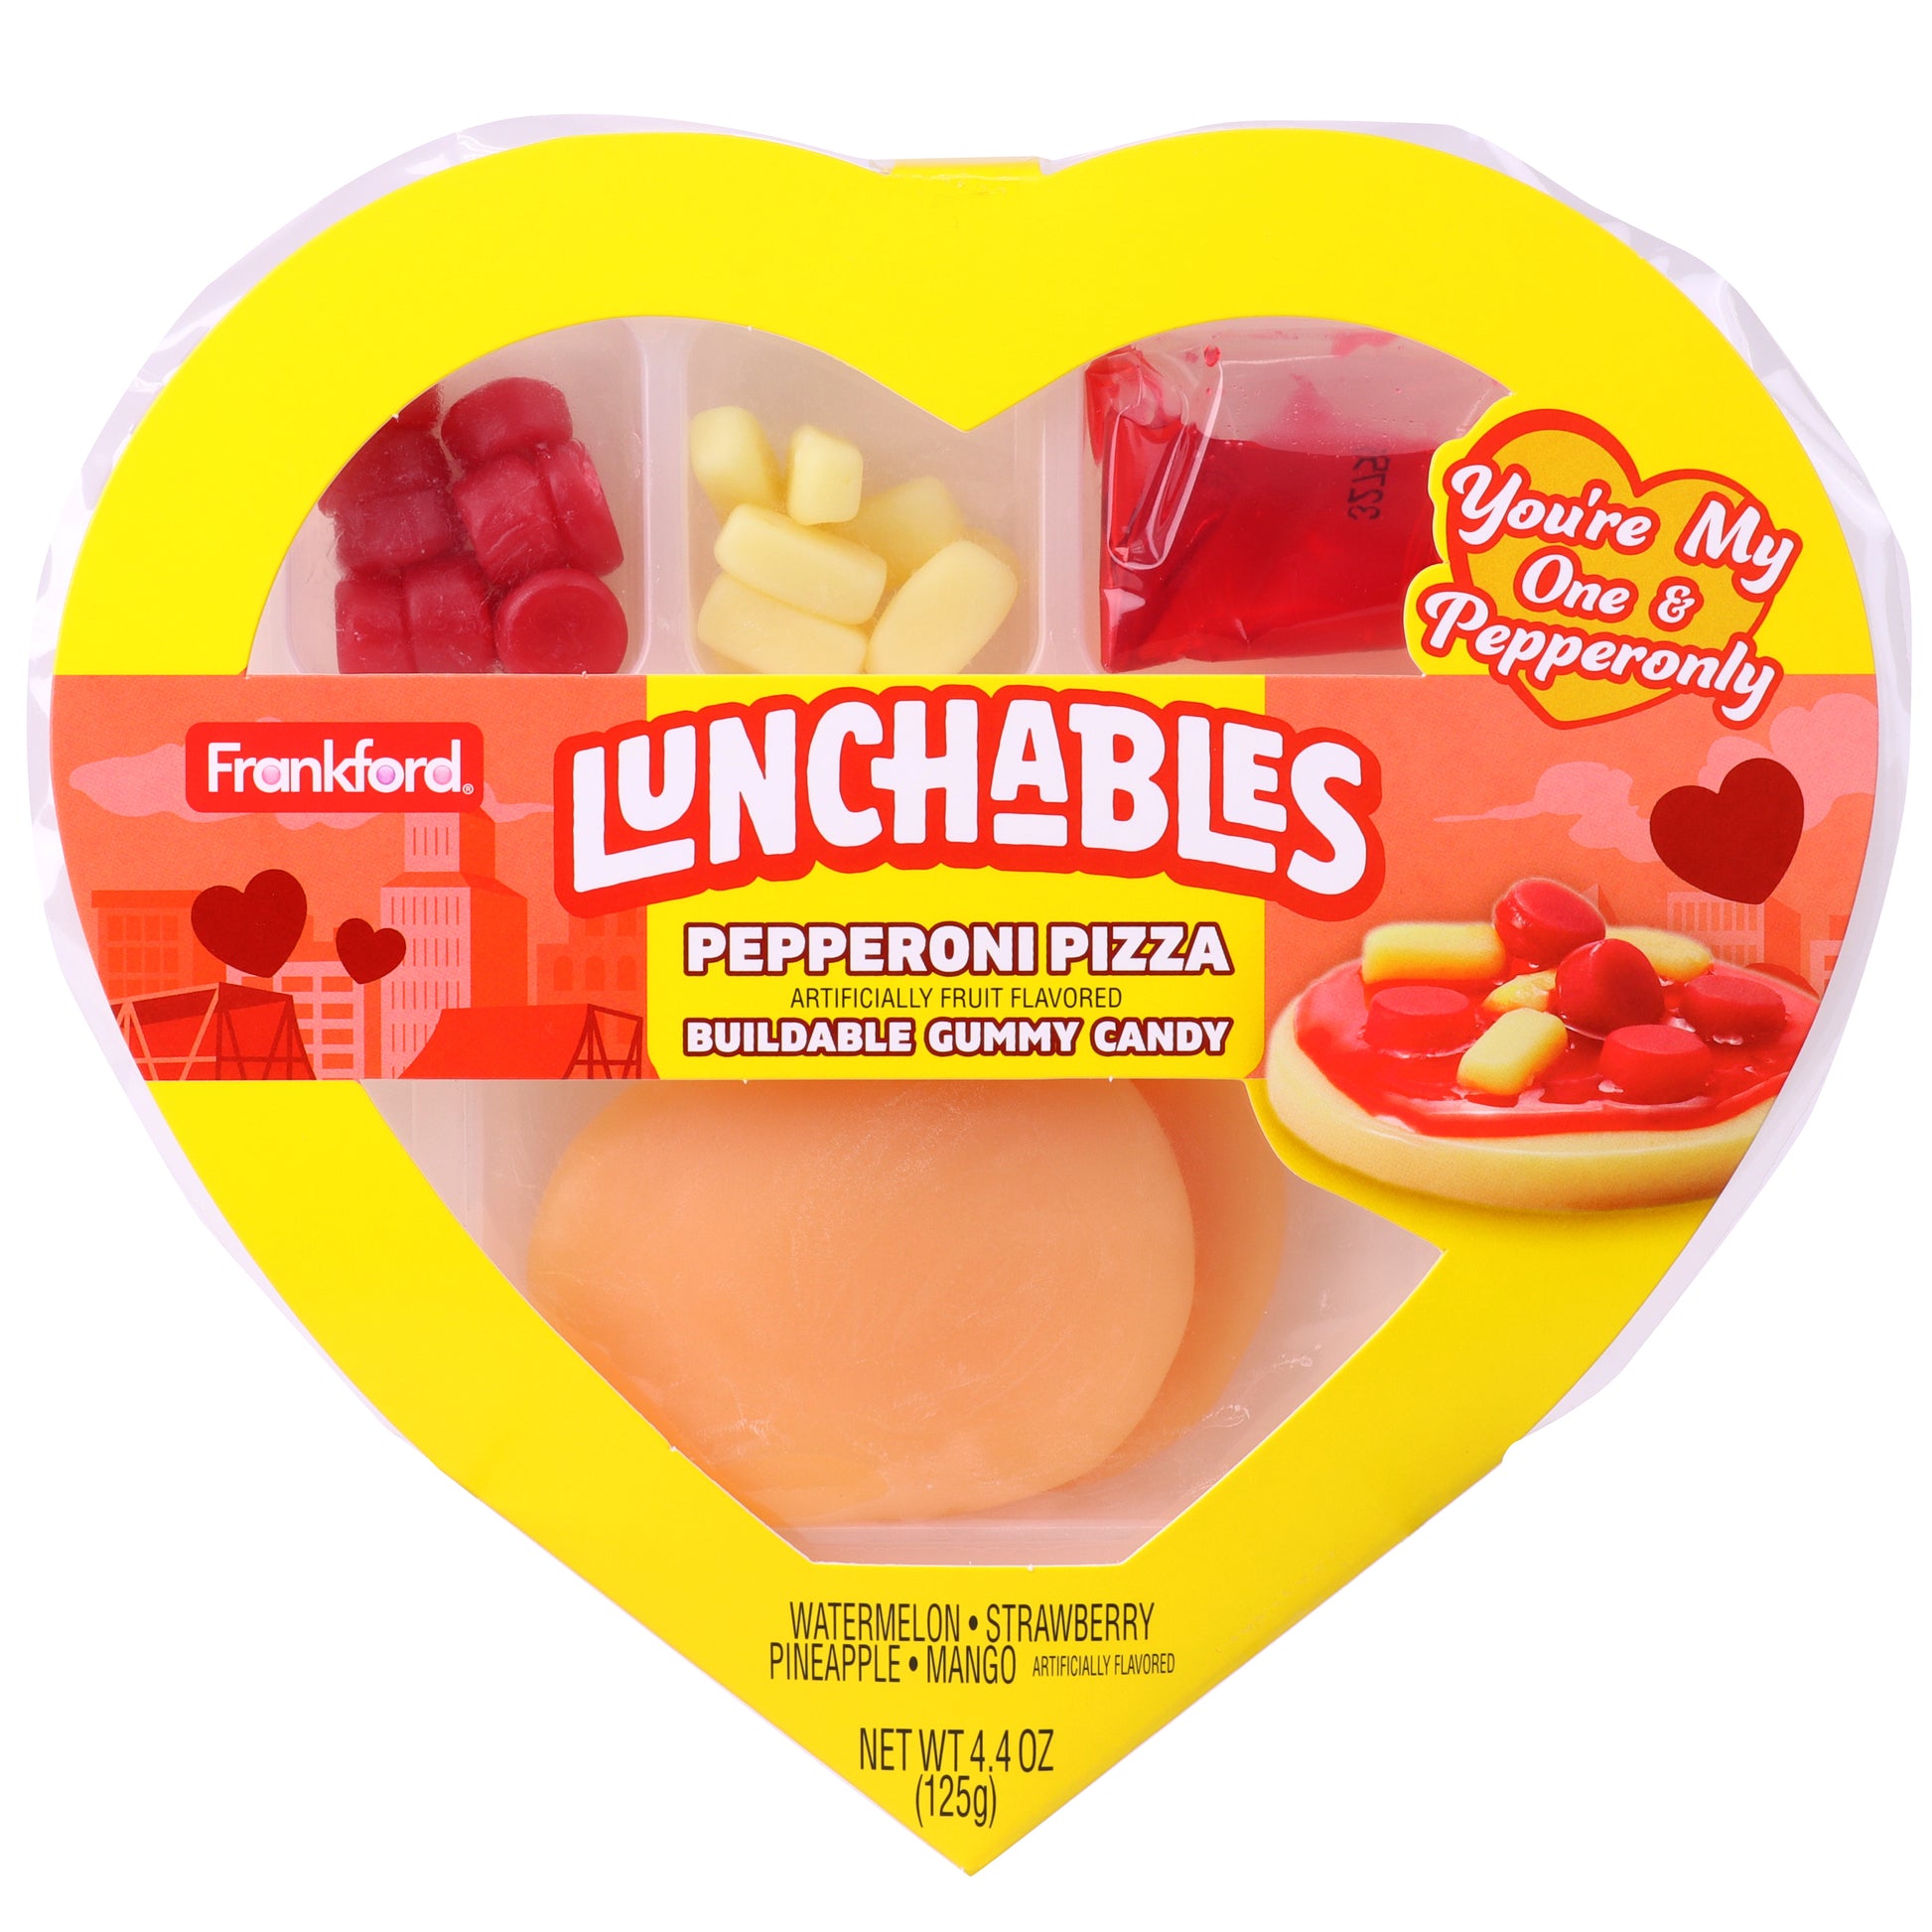 Yellow heart shaped box with gummy pizza bases and toppings